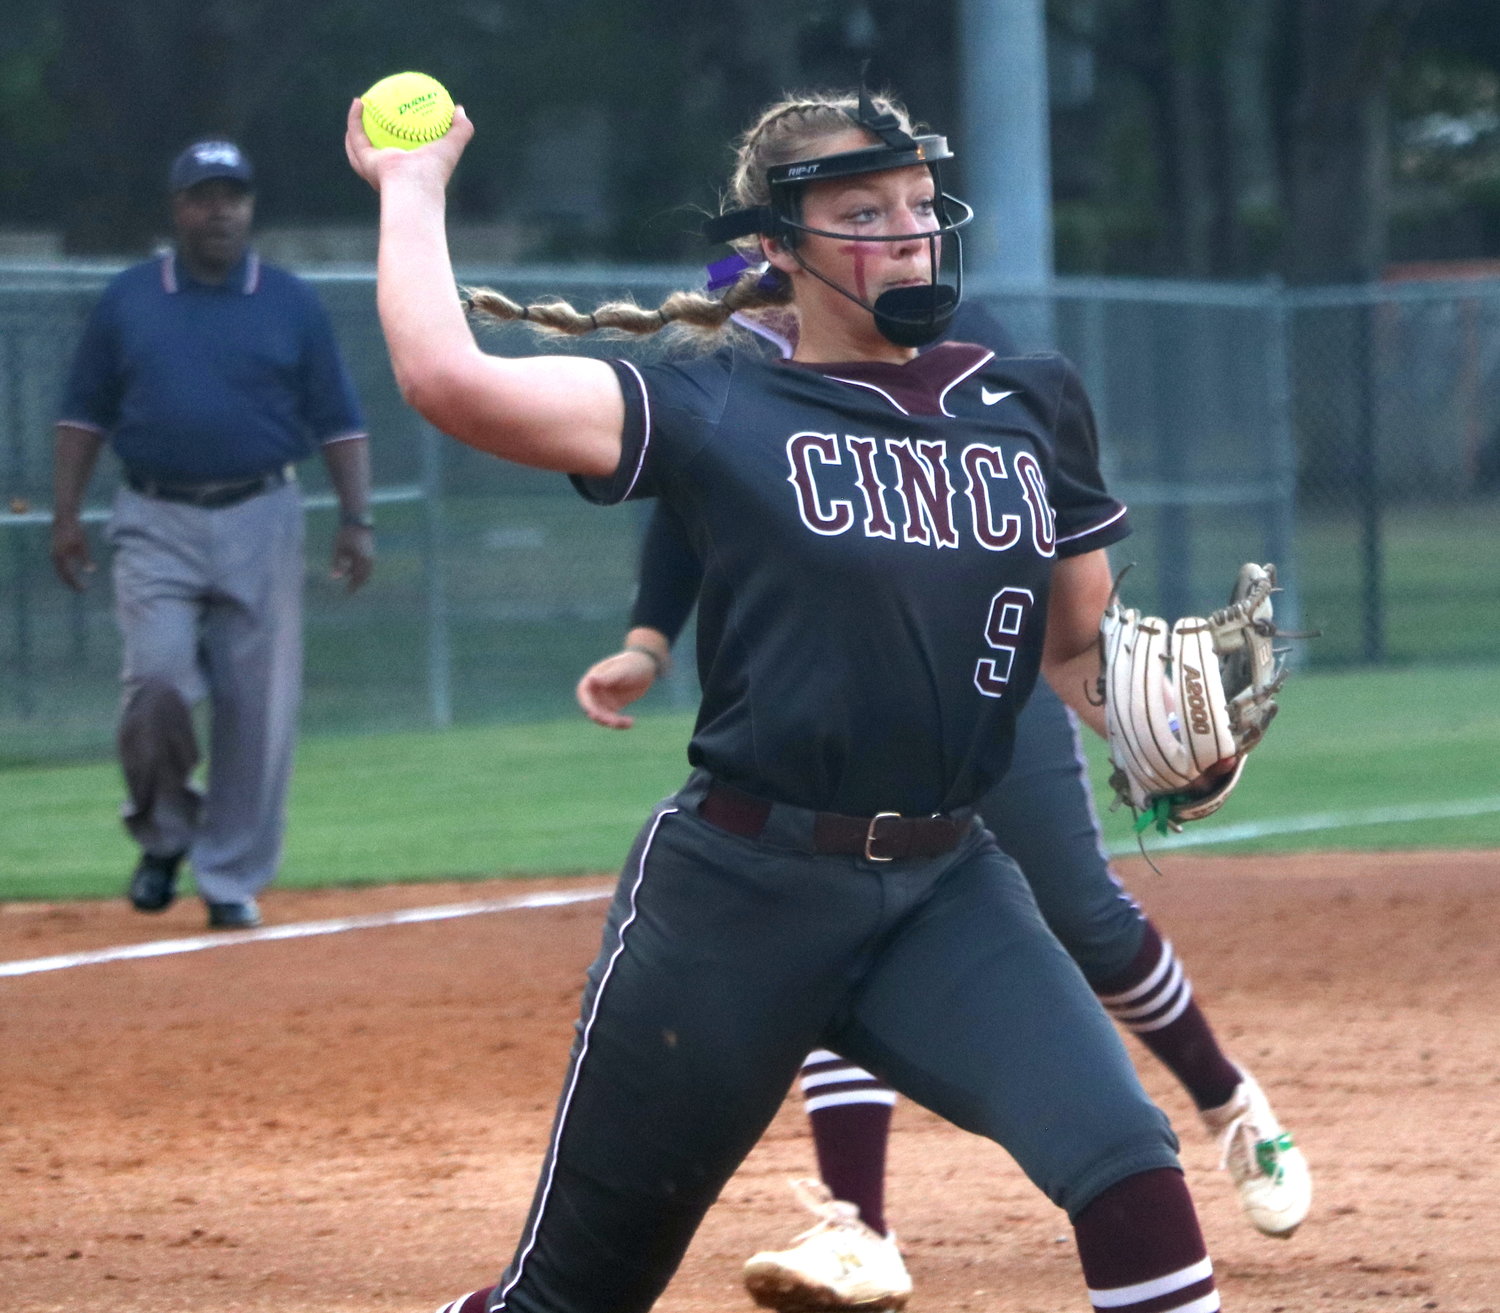 Chela Kovar throws a ball to first base during Friday's area round game between Cinco Ranch and Heights at Memorial High School.